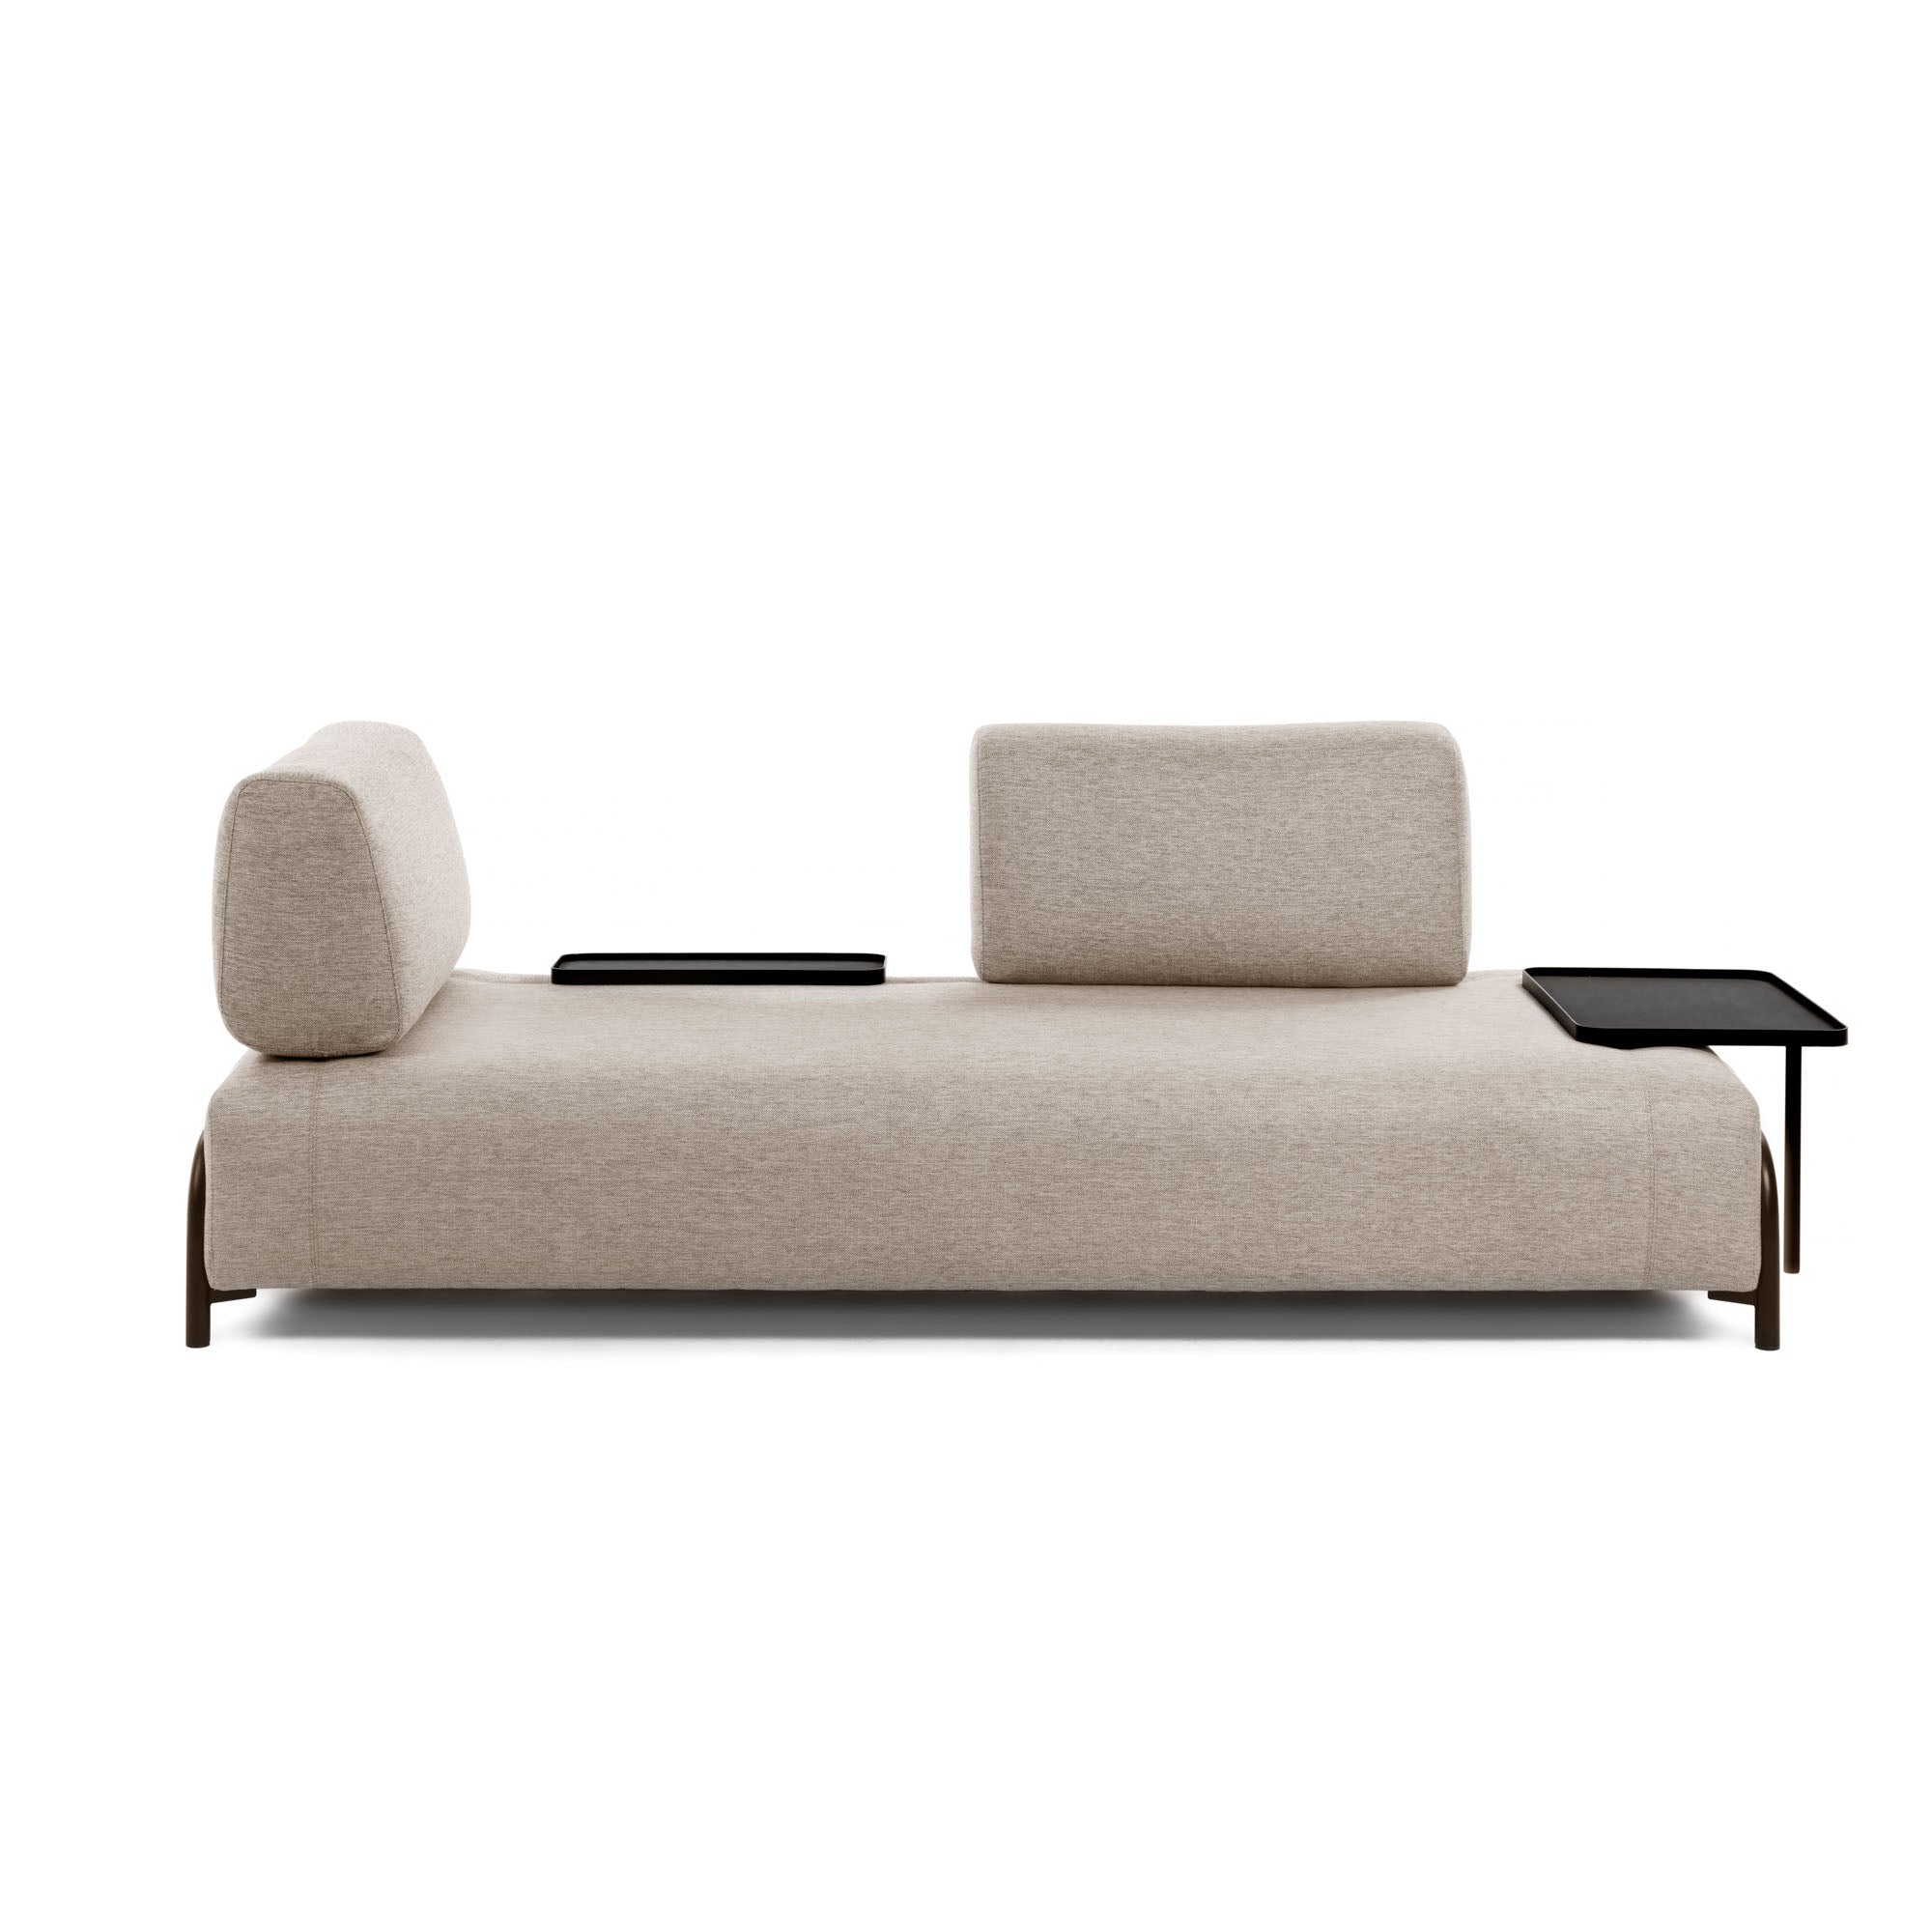 Compo 3 seater sofa with large tray in beige, 252 cm